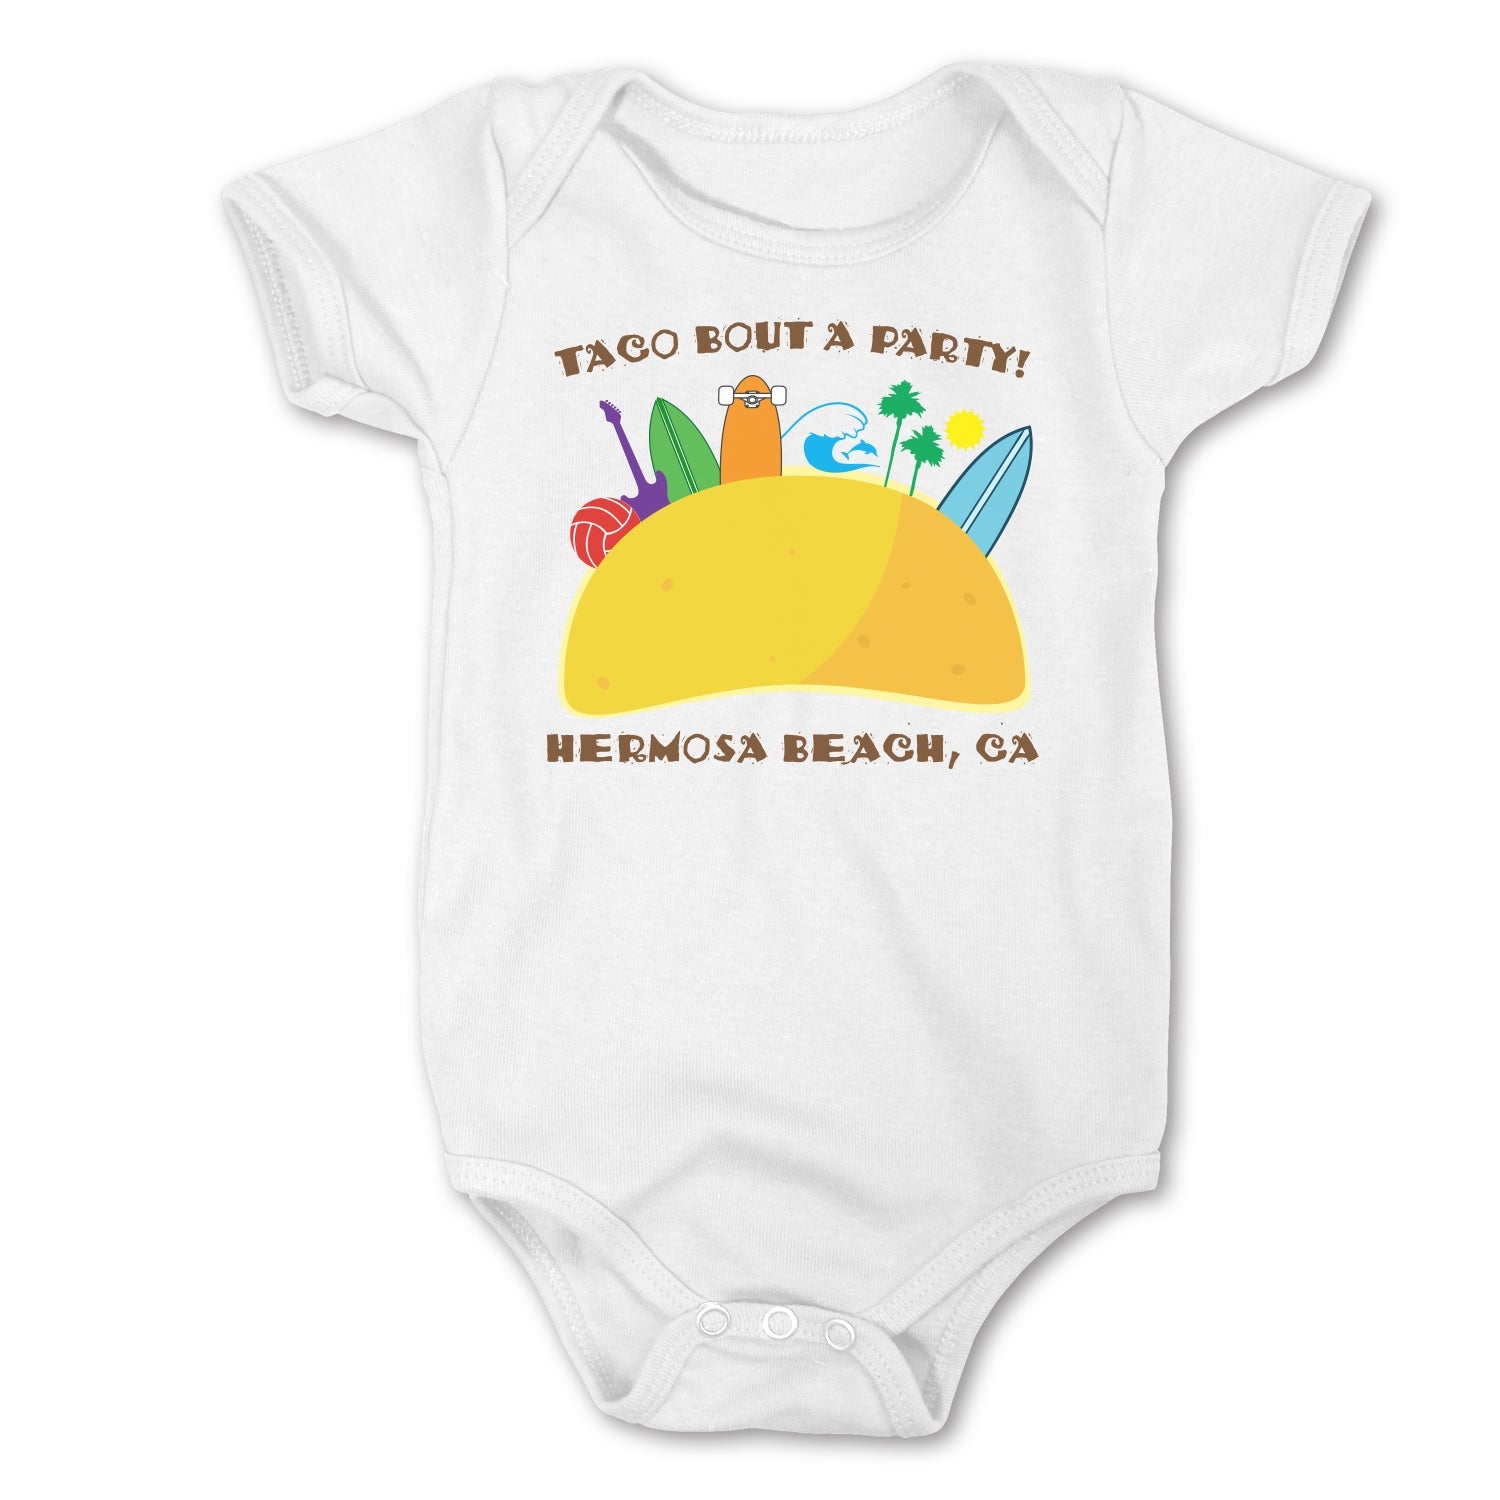 Sol Baby Taco Bout a Party Hermosa Beach Bodysuit